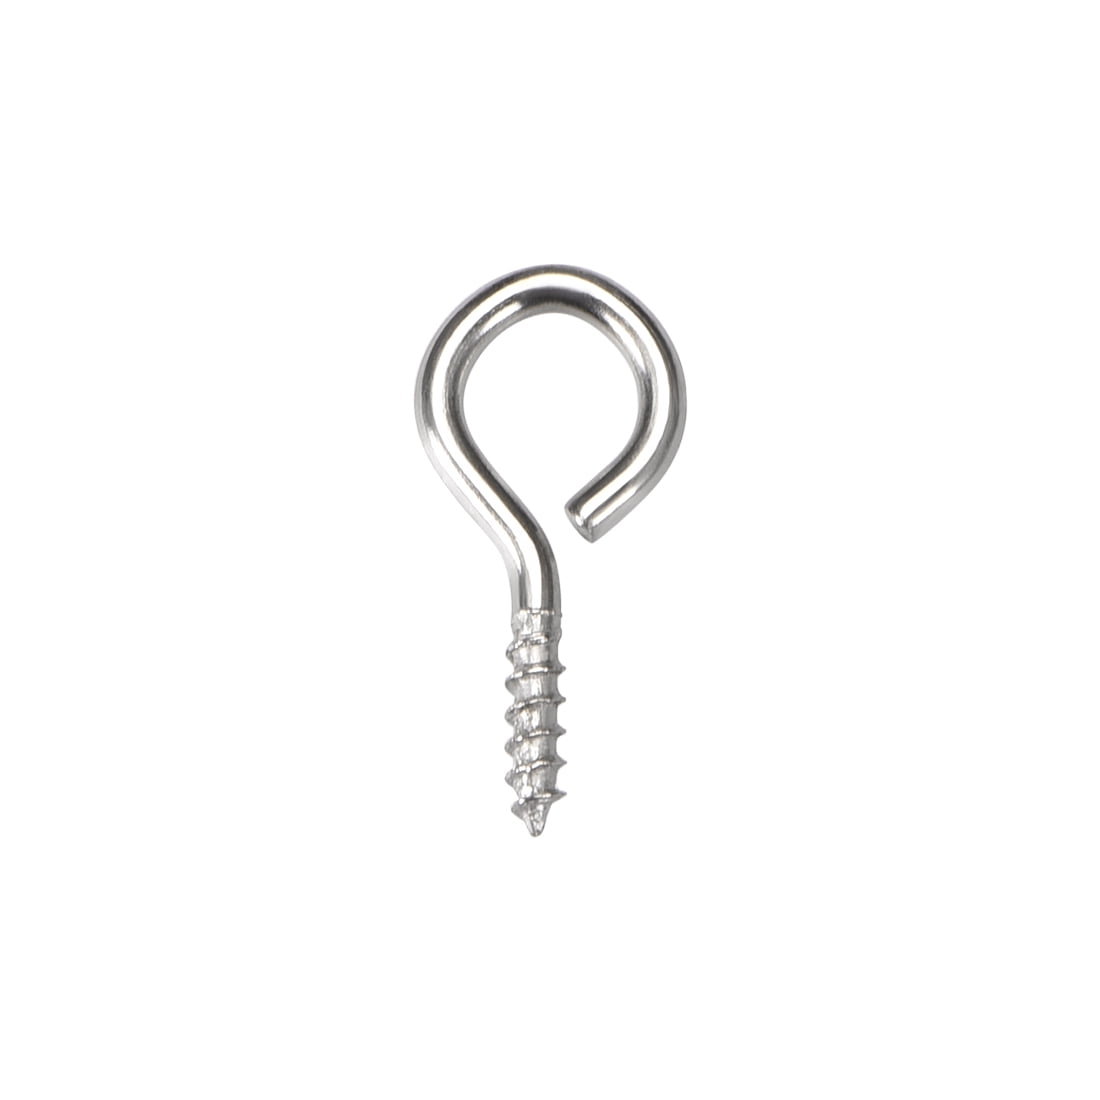 Business Industrial Self Tapping Ceiling 100 Screw In Hooks